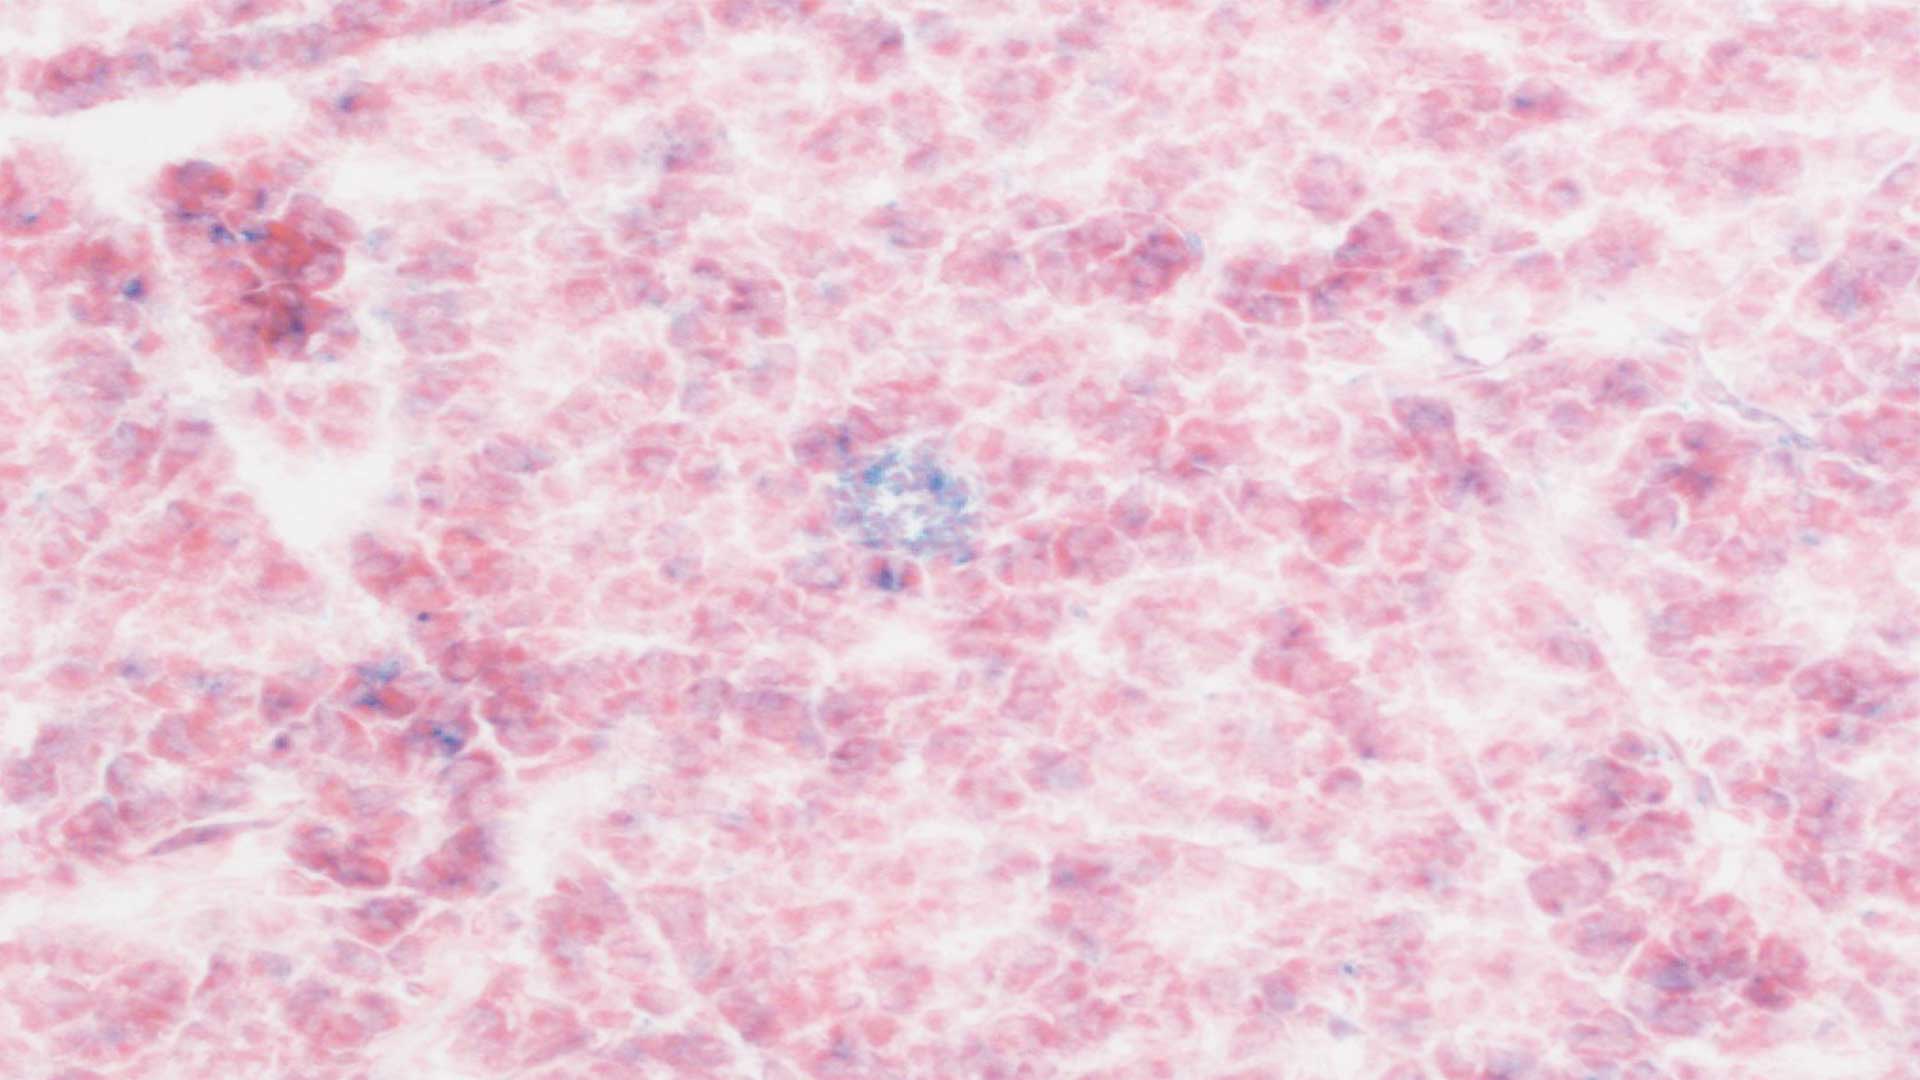 Image of mouse pancreatic tissue treated with CAR T cells